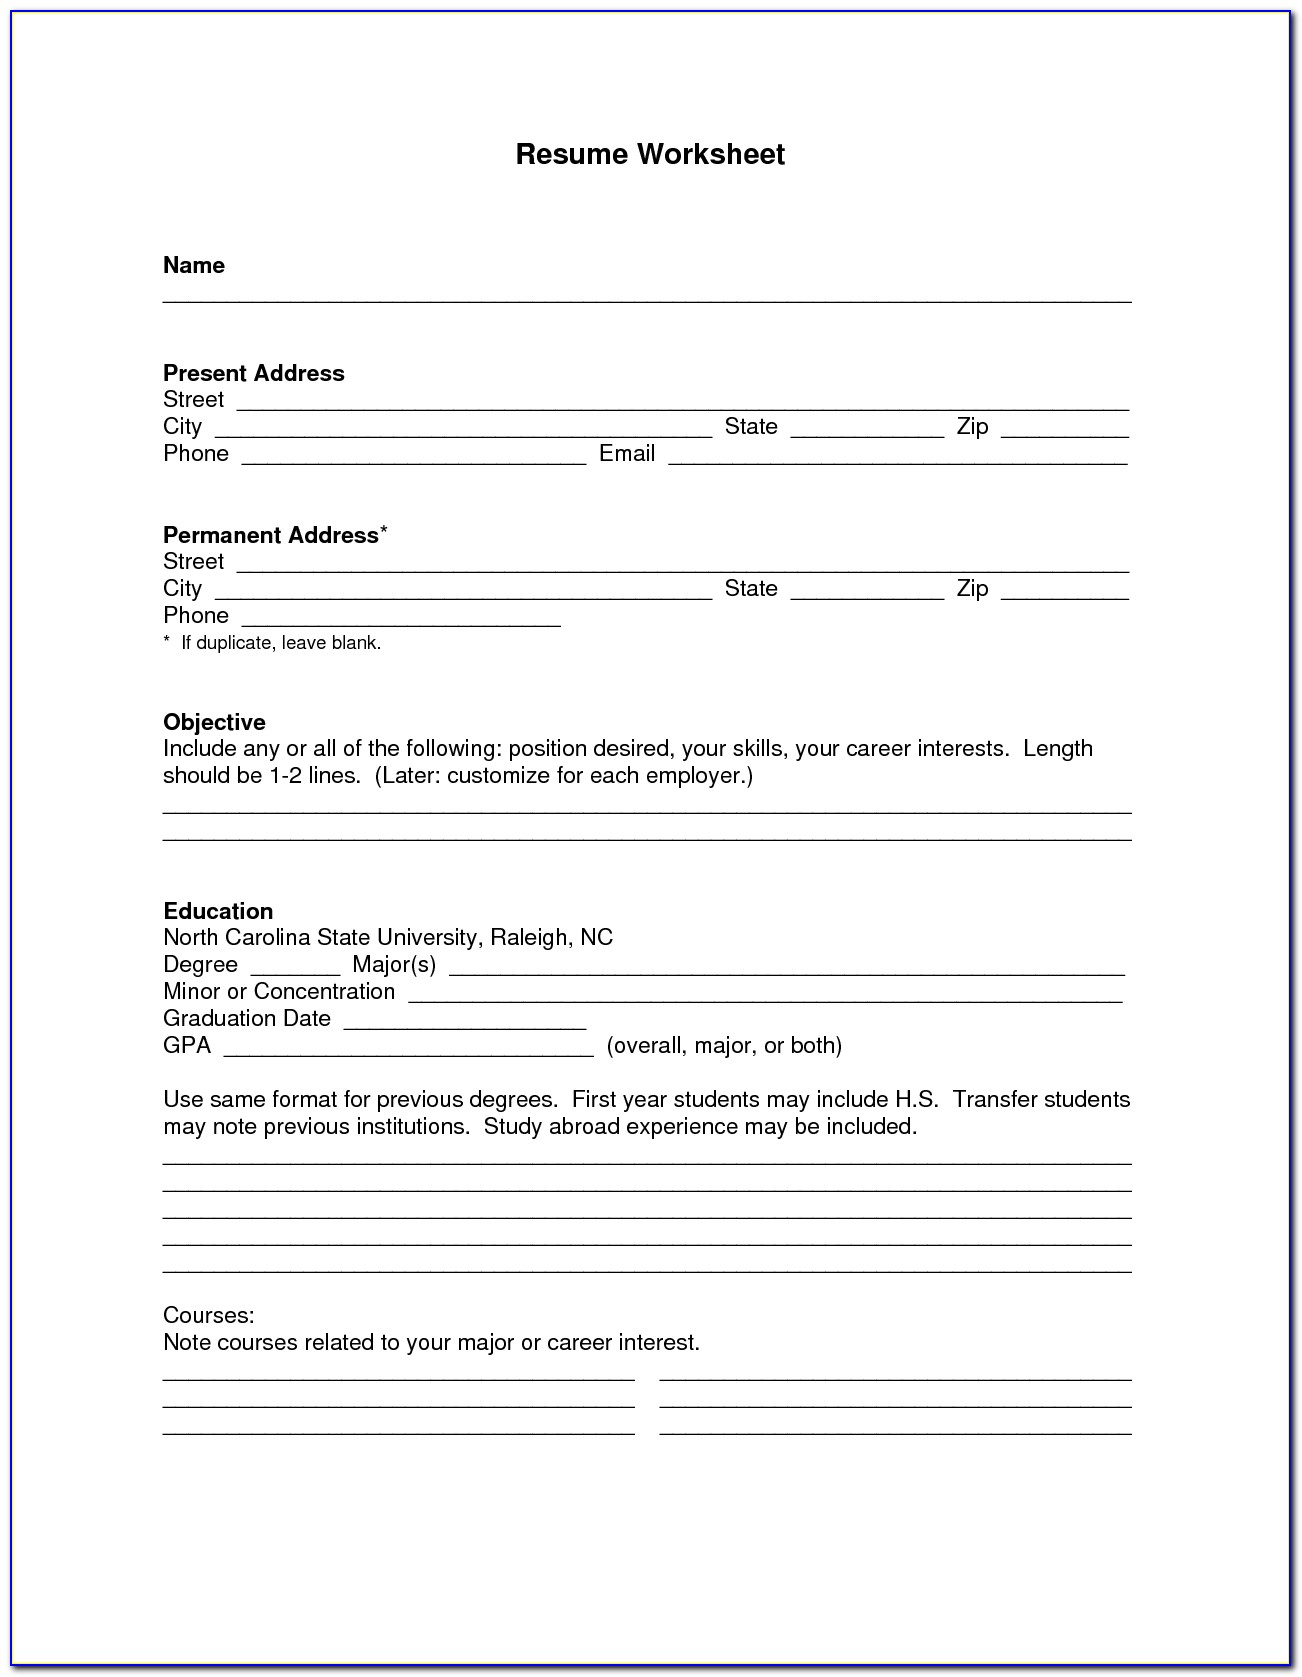 Blank Templates For Resumes Free